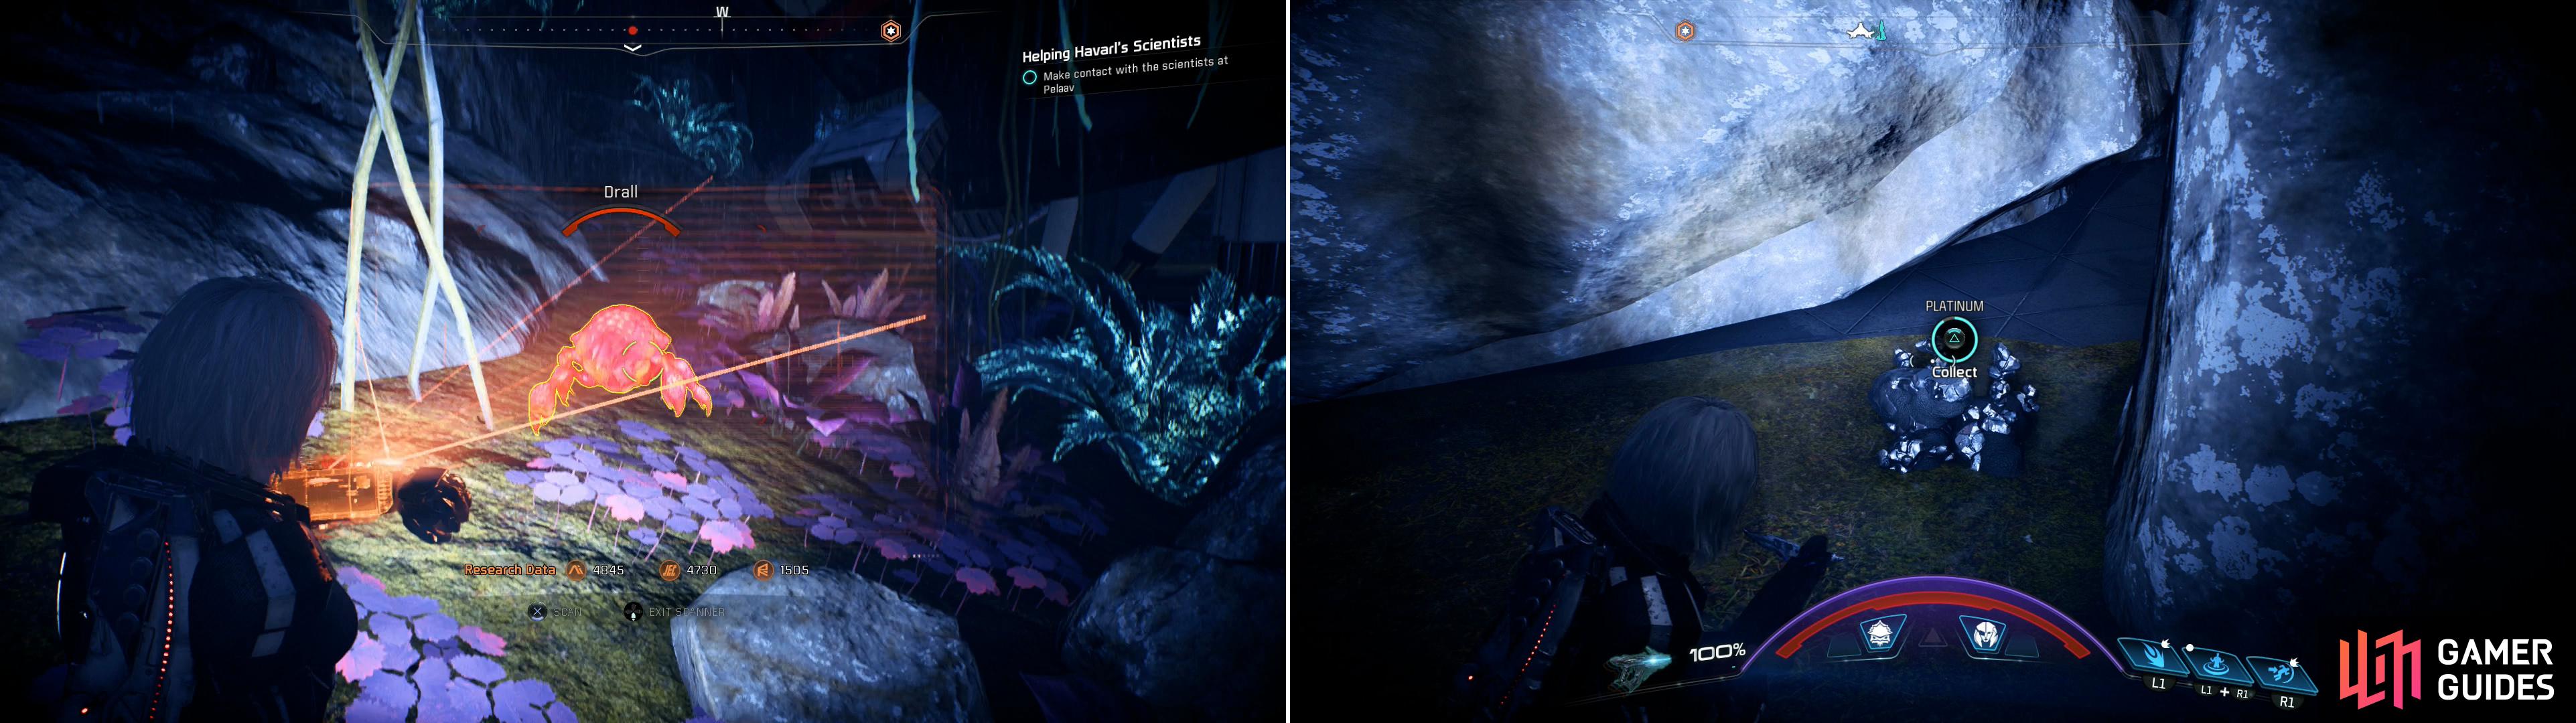 On Havarl you'll find plentiful new lifeforms to scan (left) as well as abundant Platinum deposits (right).